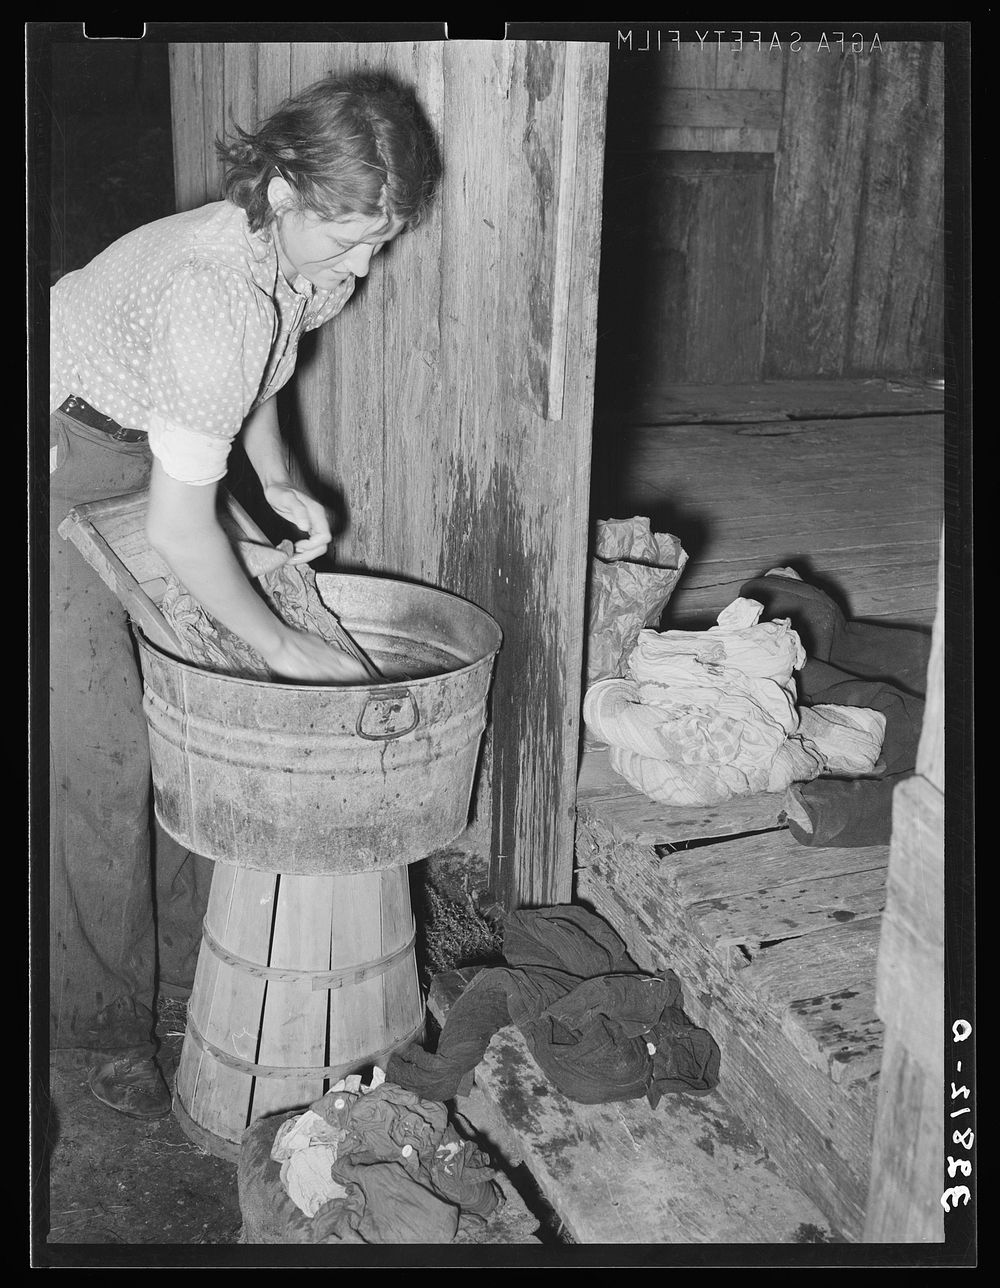 White woman, migratory berry picker, doing the laundry near Ponchatoula, Louisiana by Russell Lee